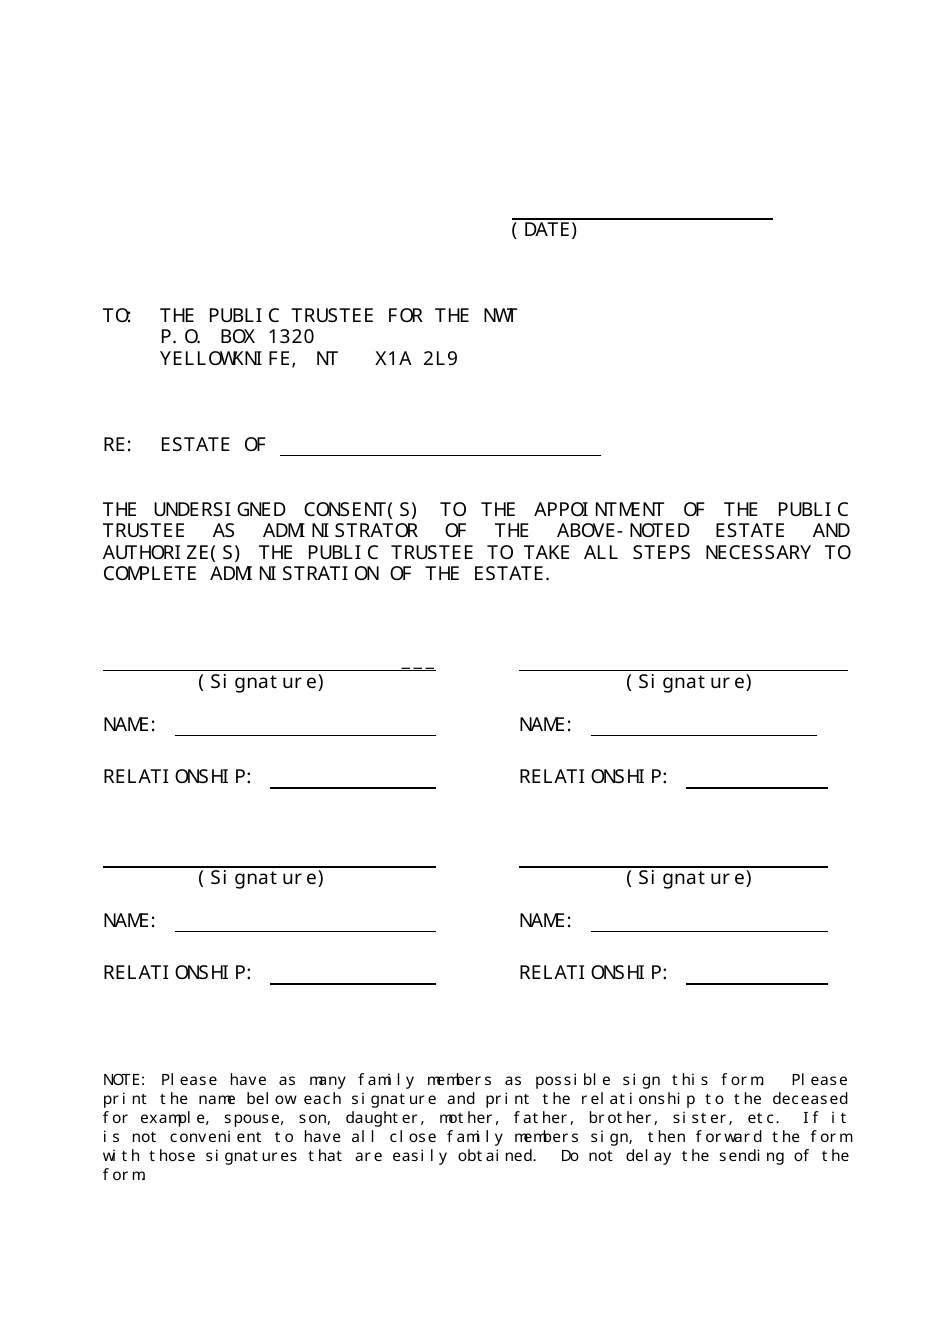 Consent to Administer Estate Form - Northwest Territories, Canada, Page 1